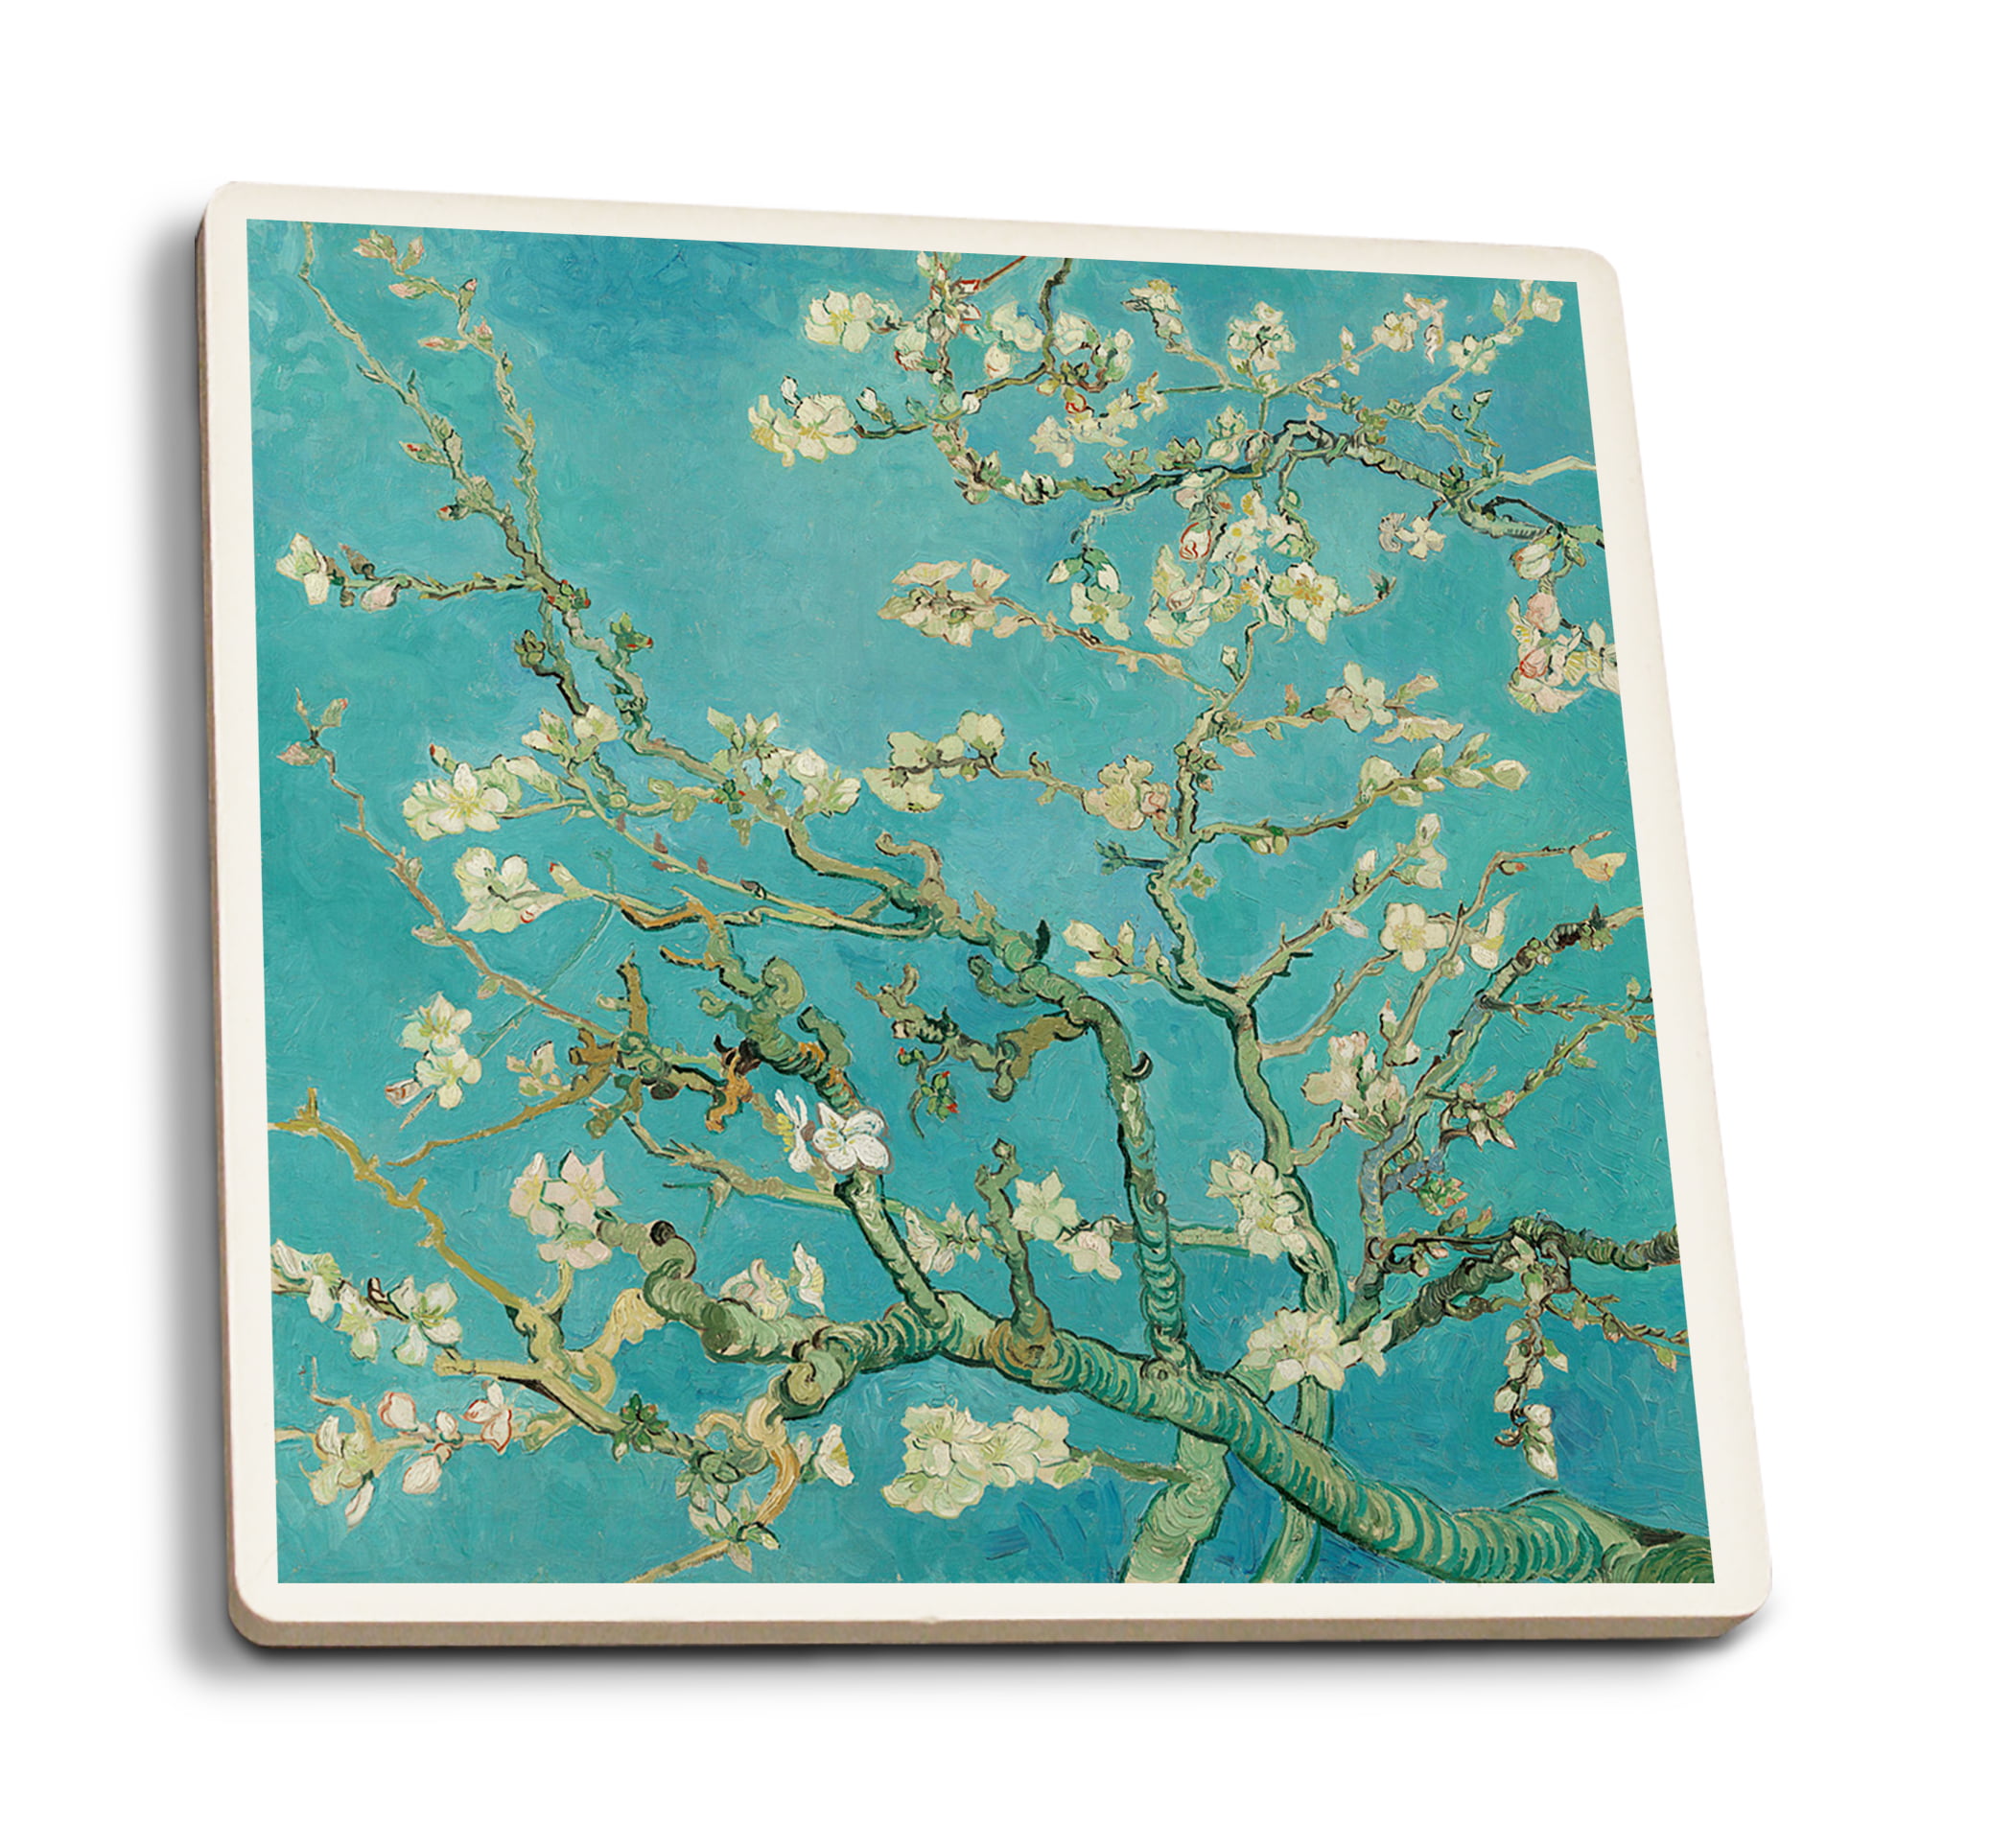 Set of 4 Van Gogh Almond Blossoms Silicone Non-Slip Drink Coasters with Removable Printed Absorbent Felt Pad 